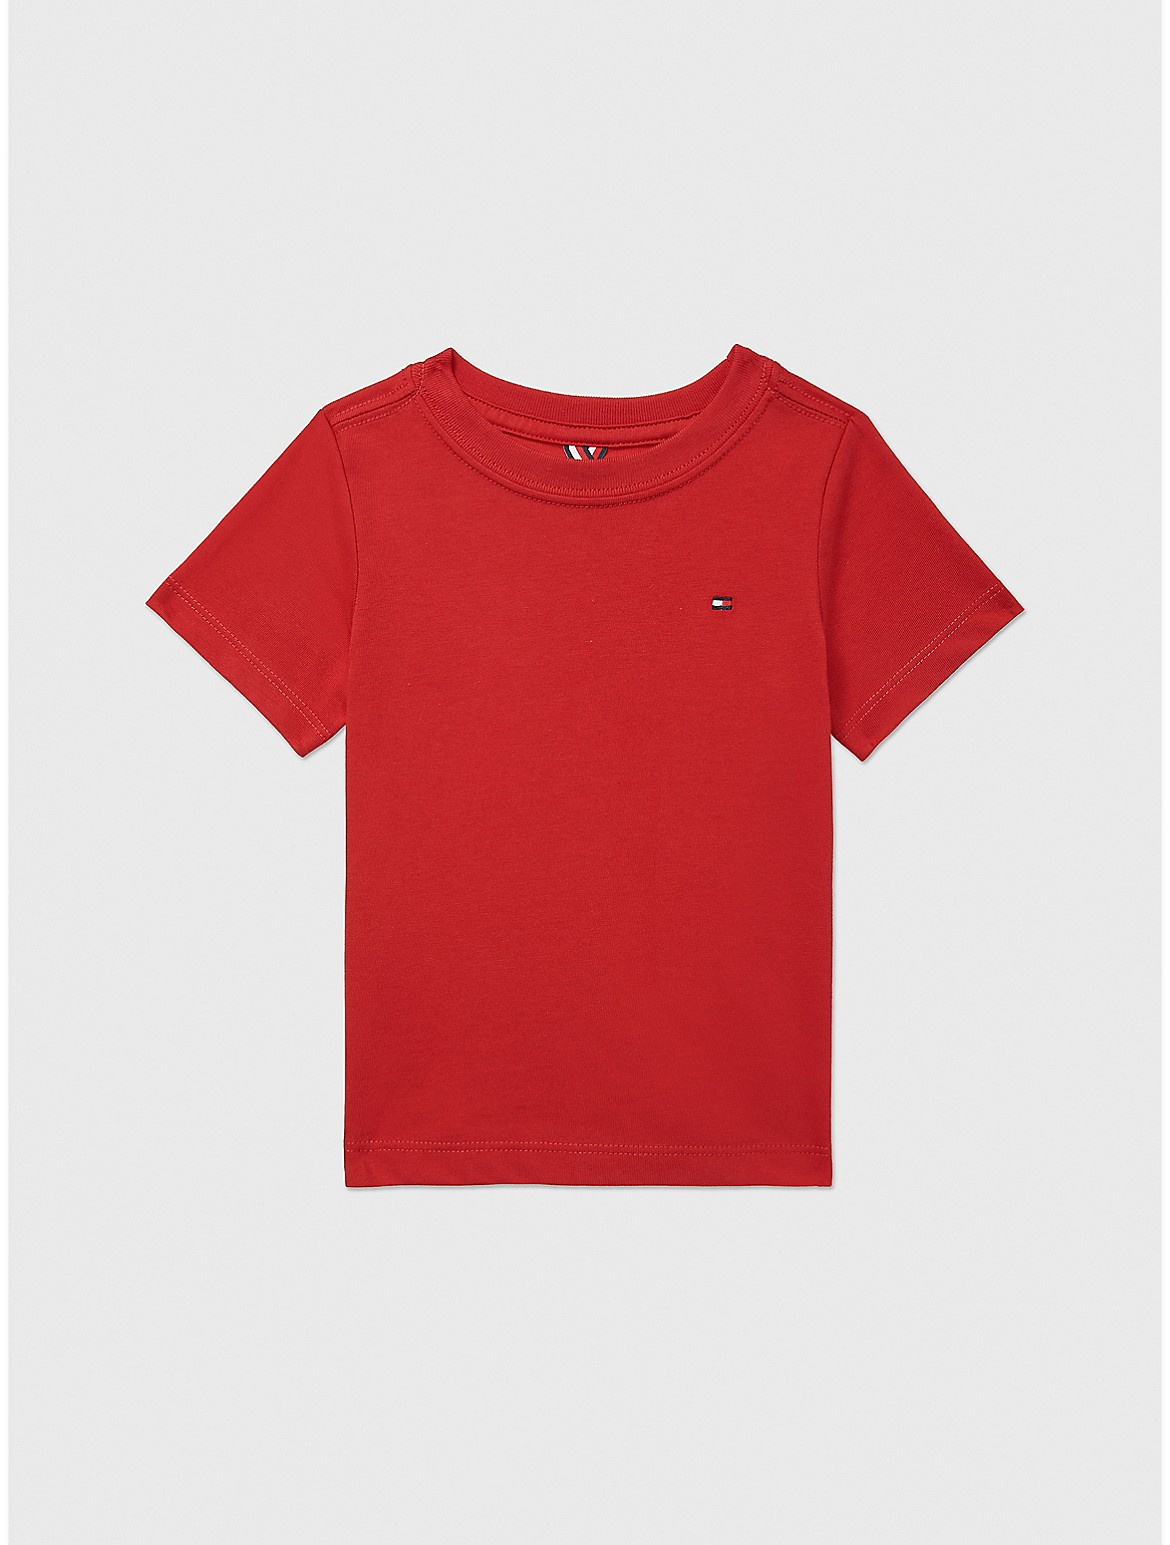 Tommy Hilfiger Boys' Babies' Solid T-Shirt - Red - 6-9M